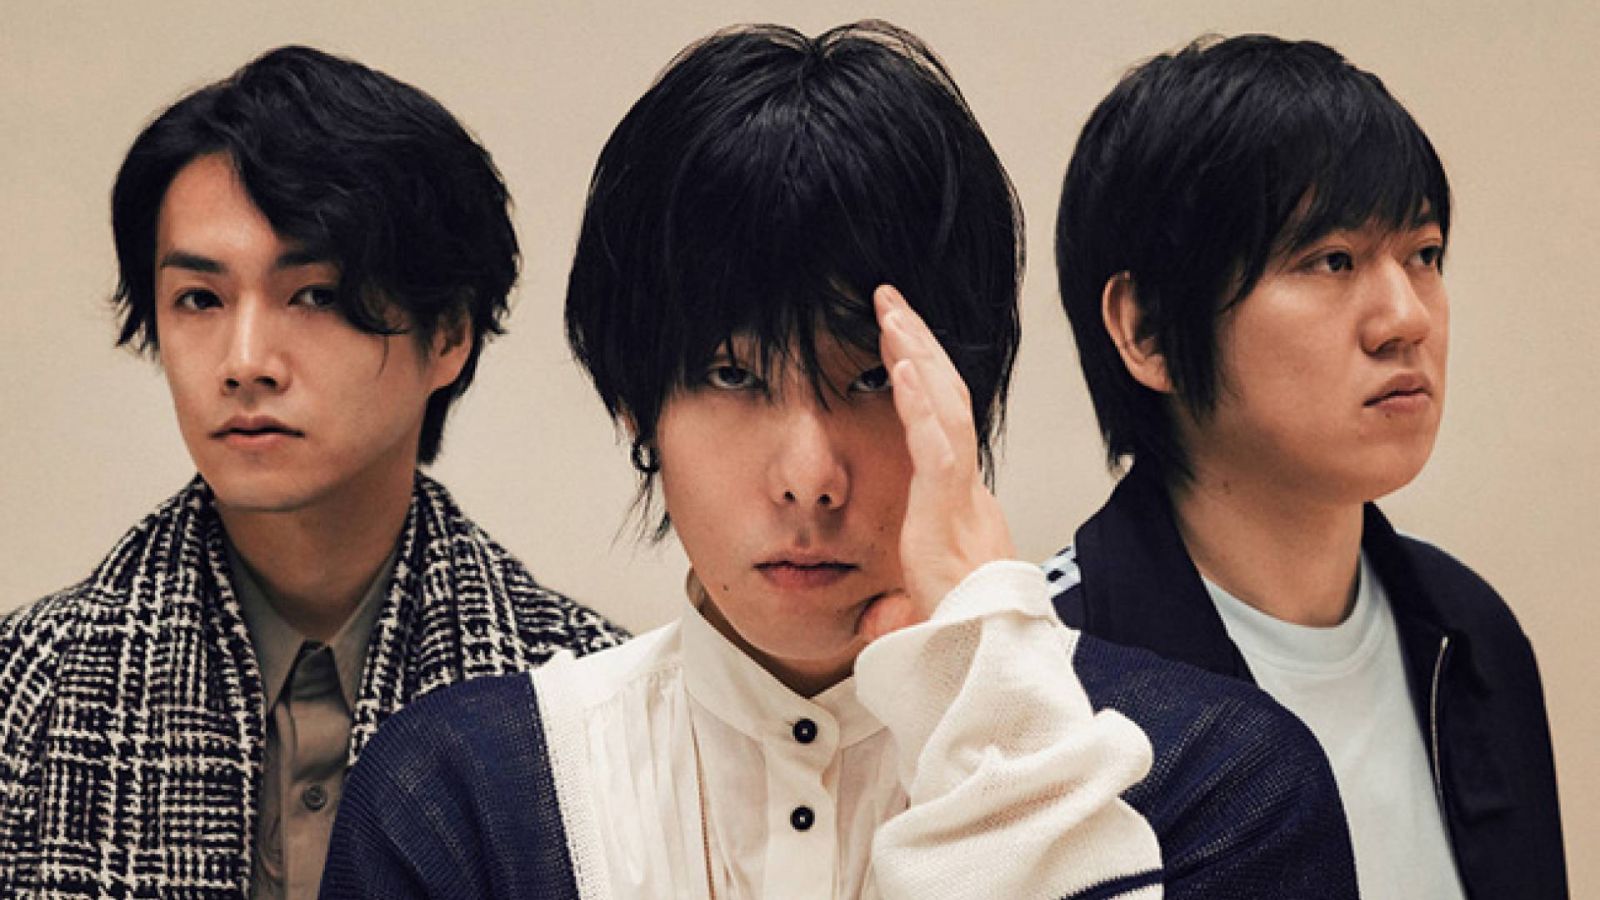 New Album from RADWIMPS © RADWIMPS. All rights reserved.